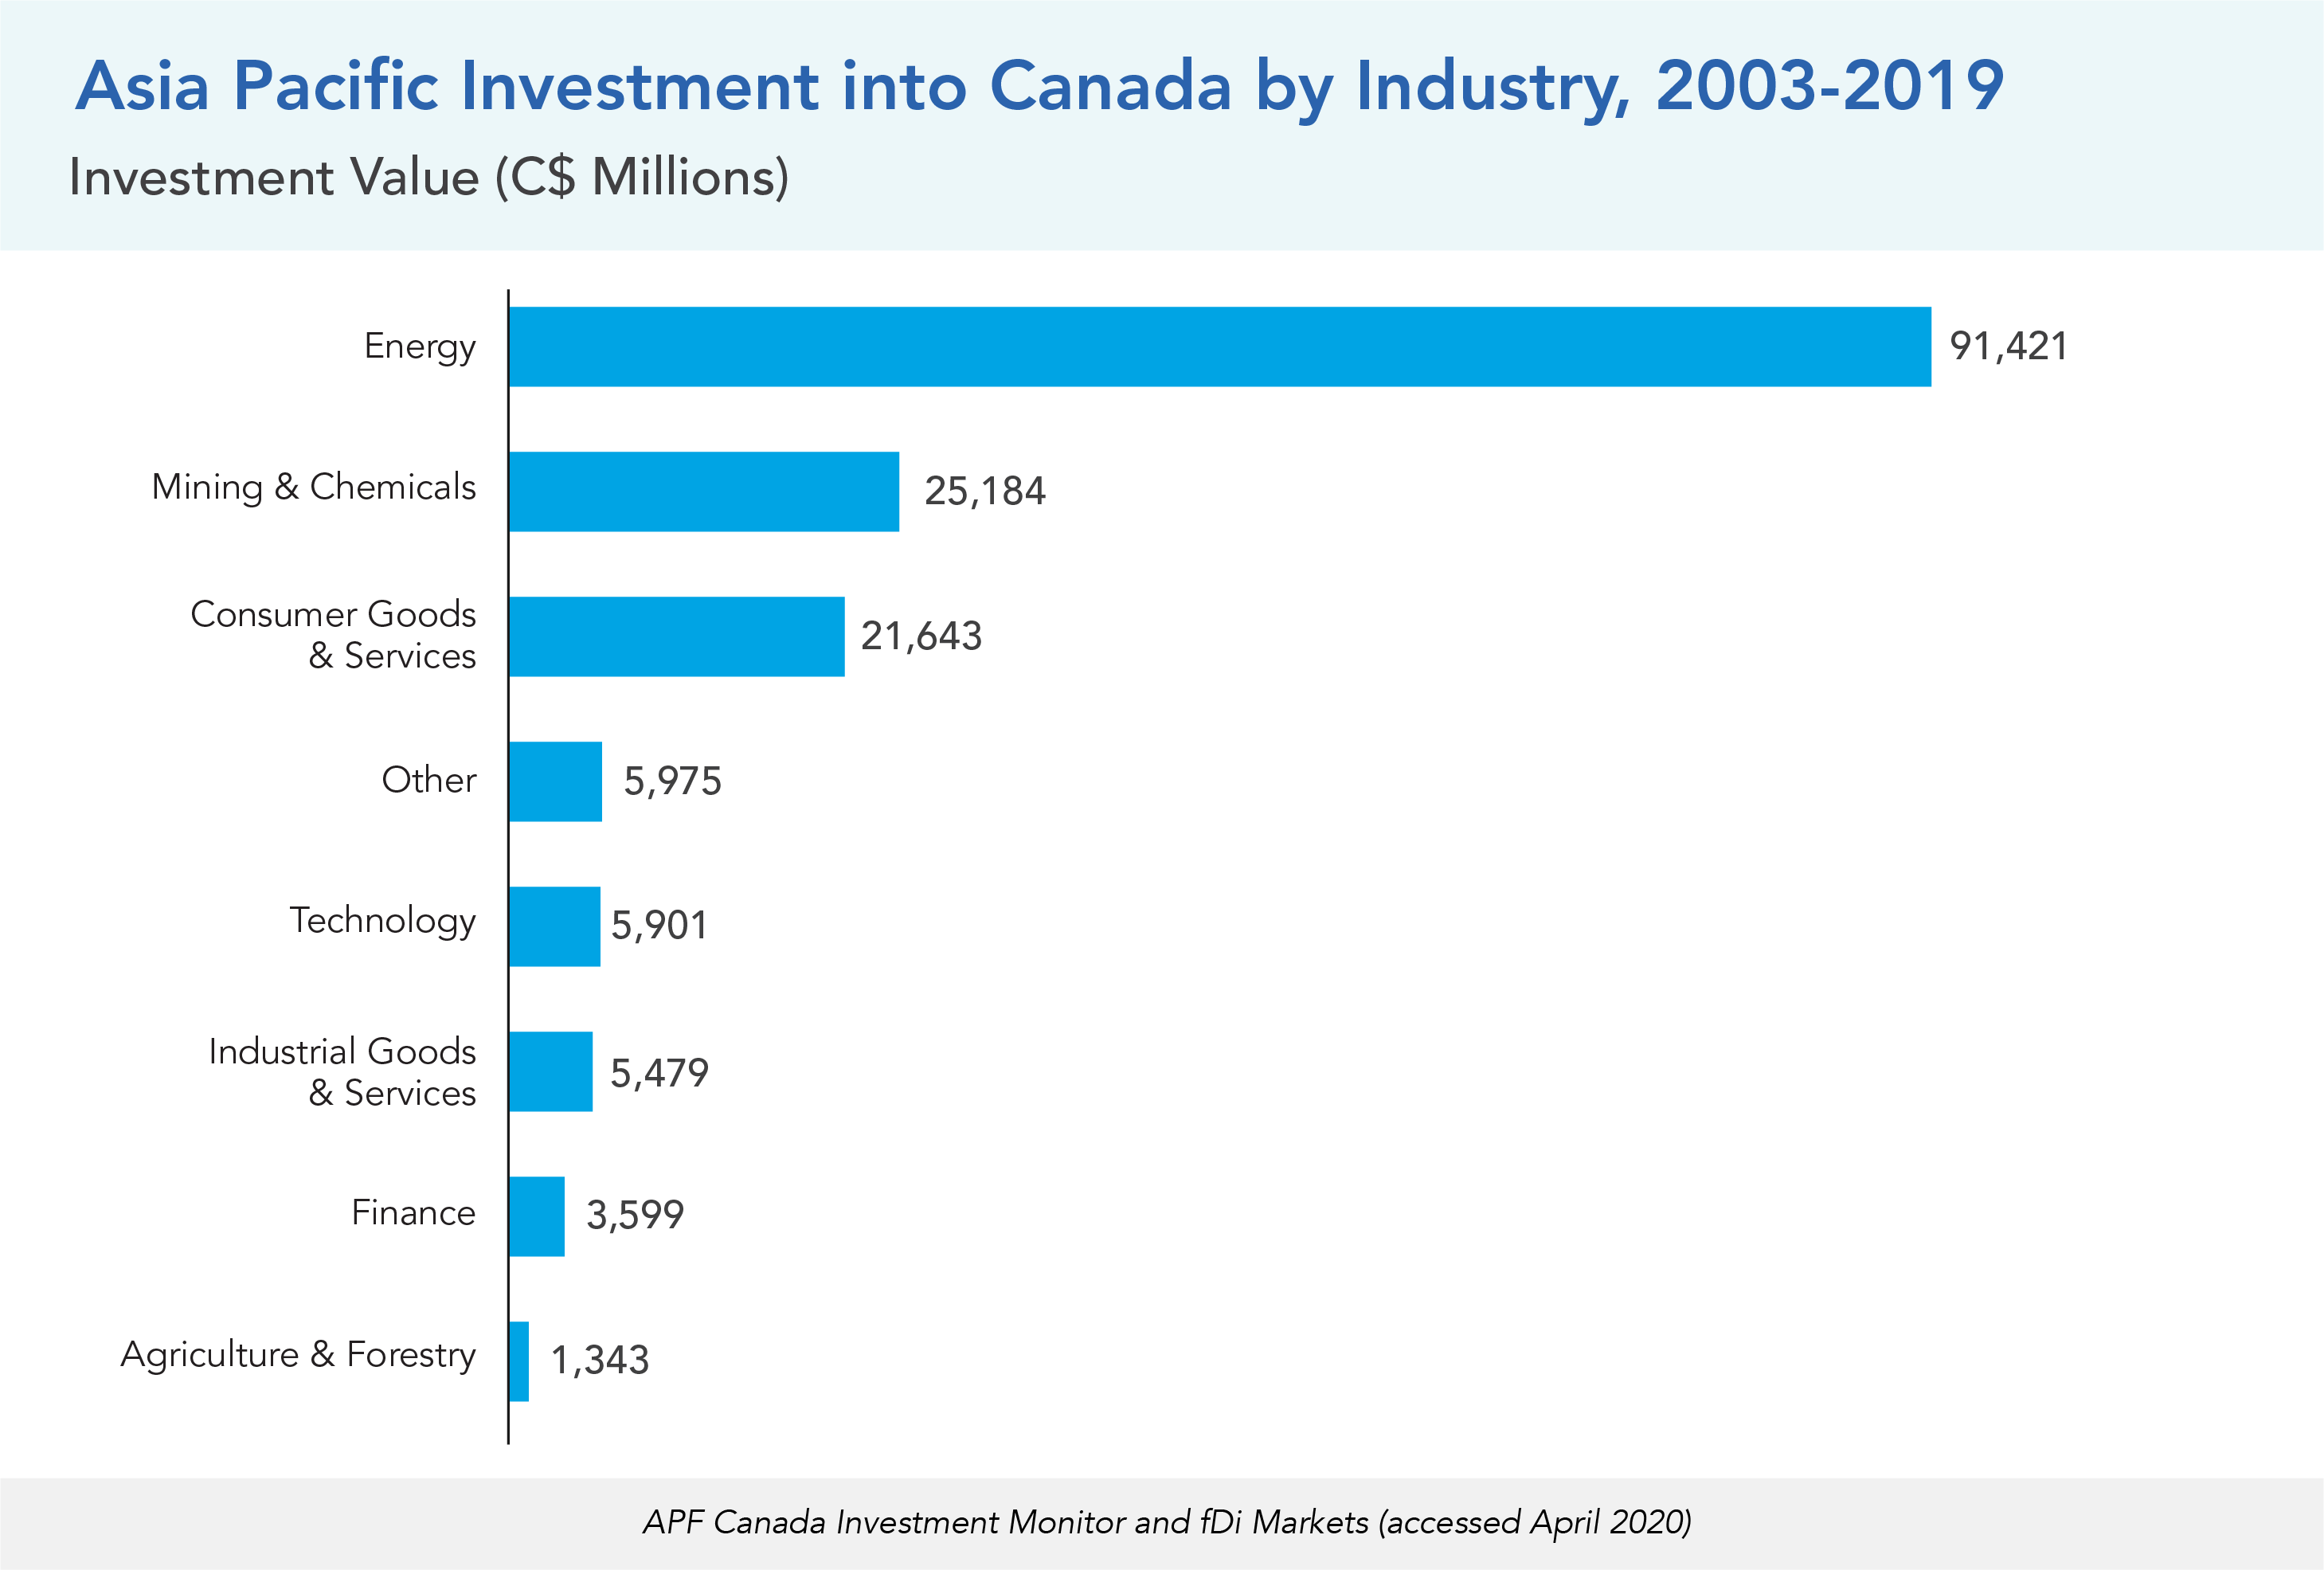 Asia Pacific Investment into Canada by Industry, 2003-2019